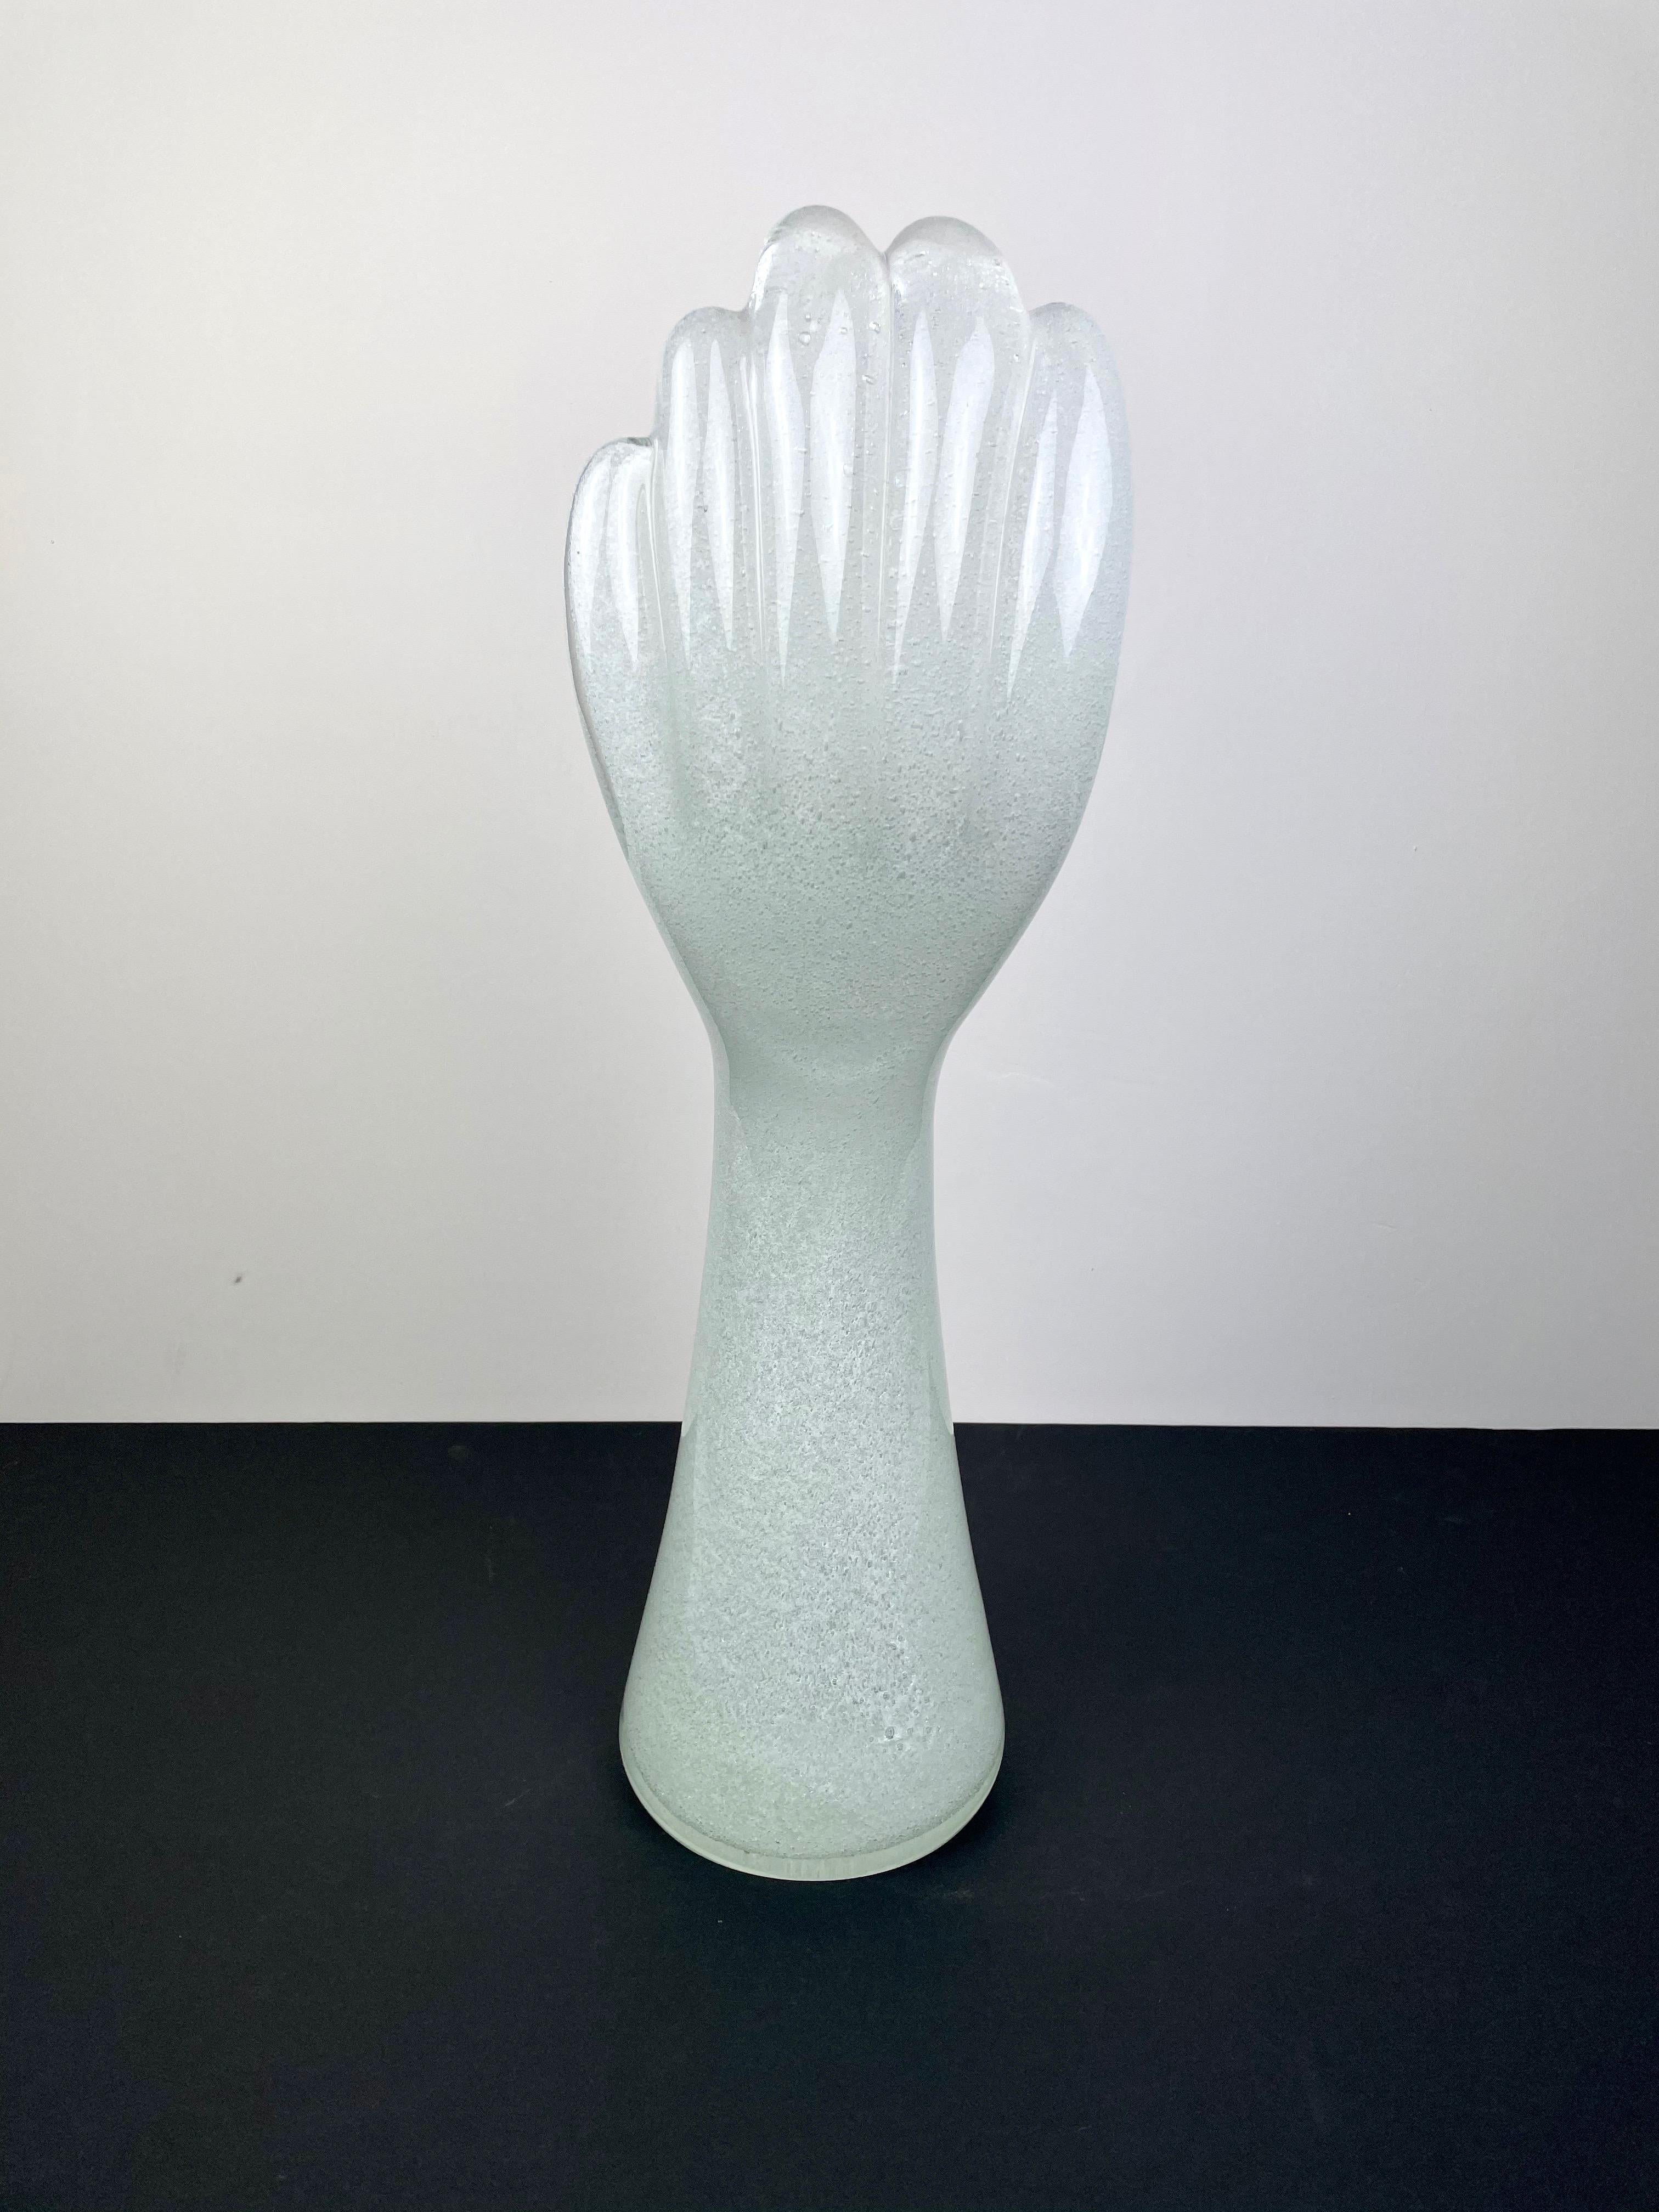 20th Century Murano Glass Hand Sculpture Signed Vistosi, Italy For Sale